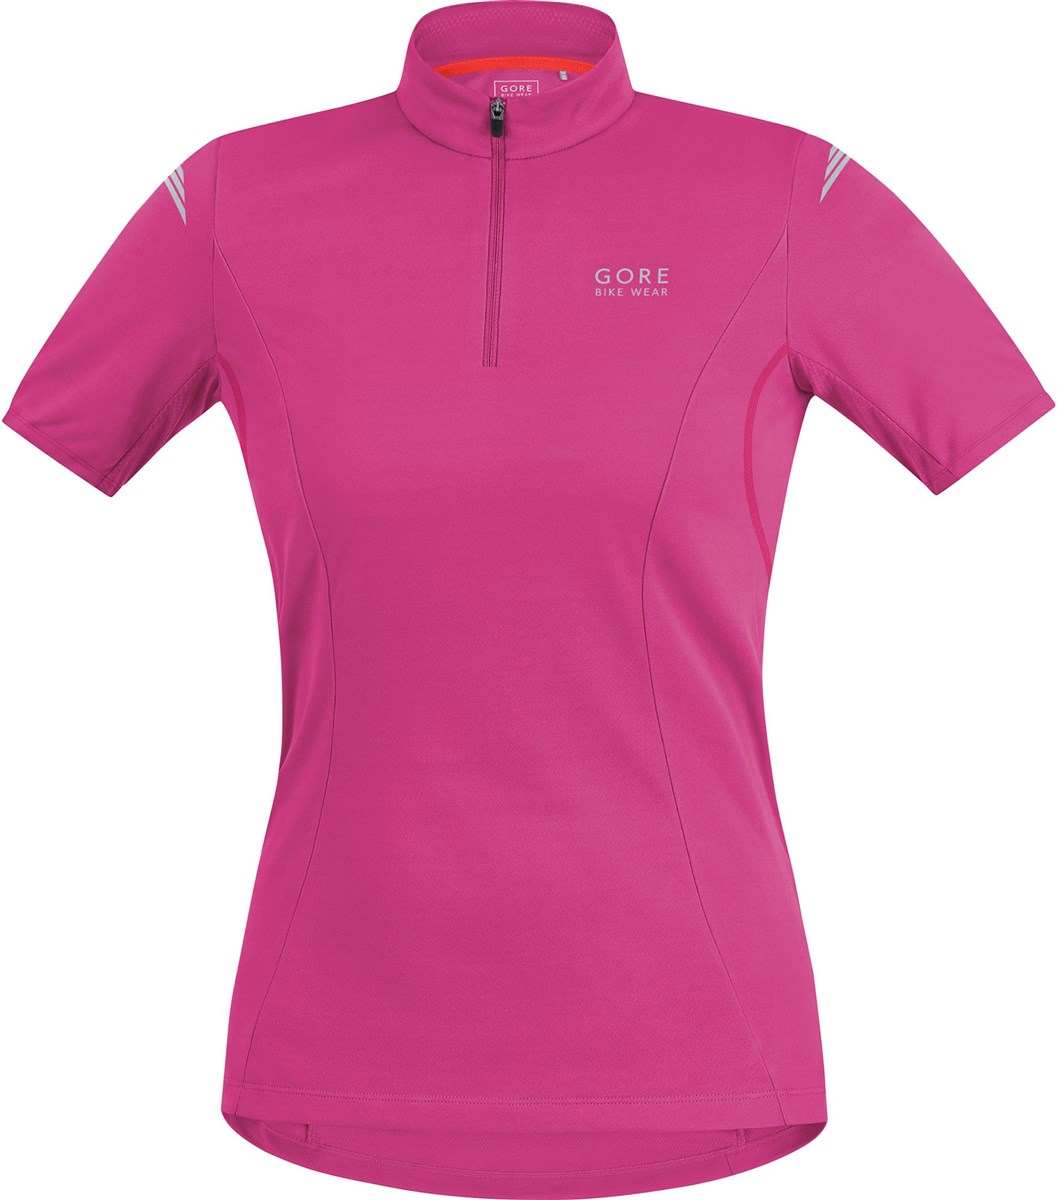 Gore E Womens Short Sleeve Jersey AW17 product image